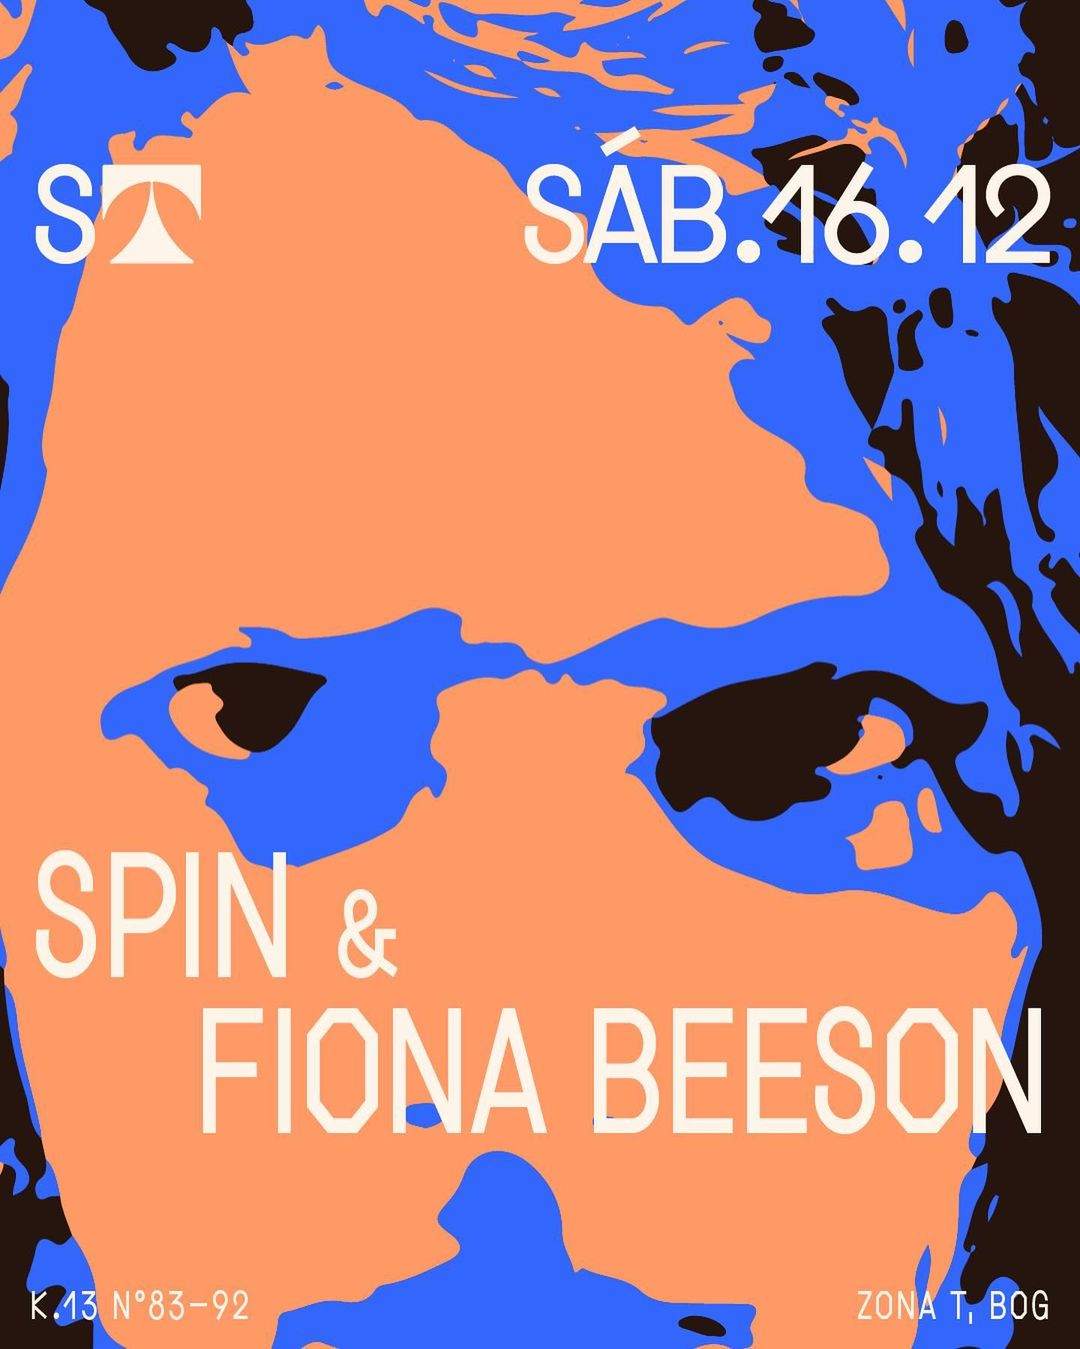 Spin & Fiona Beeson - フライヤー表